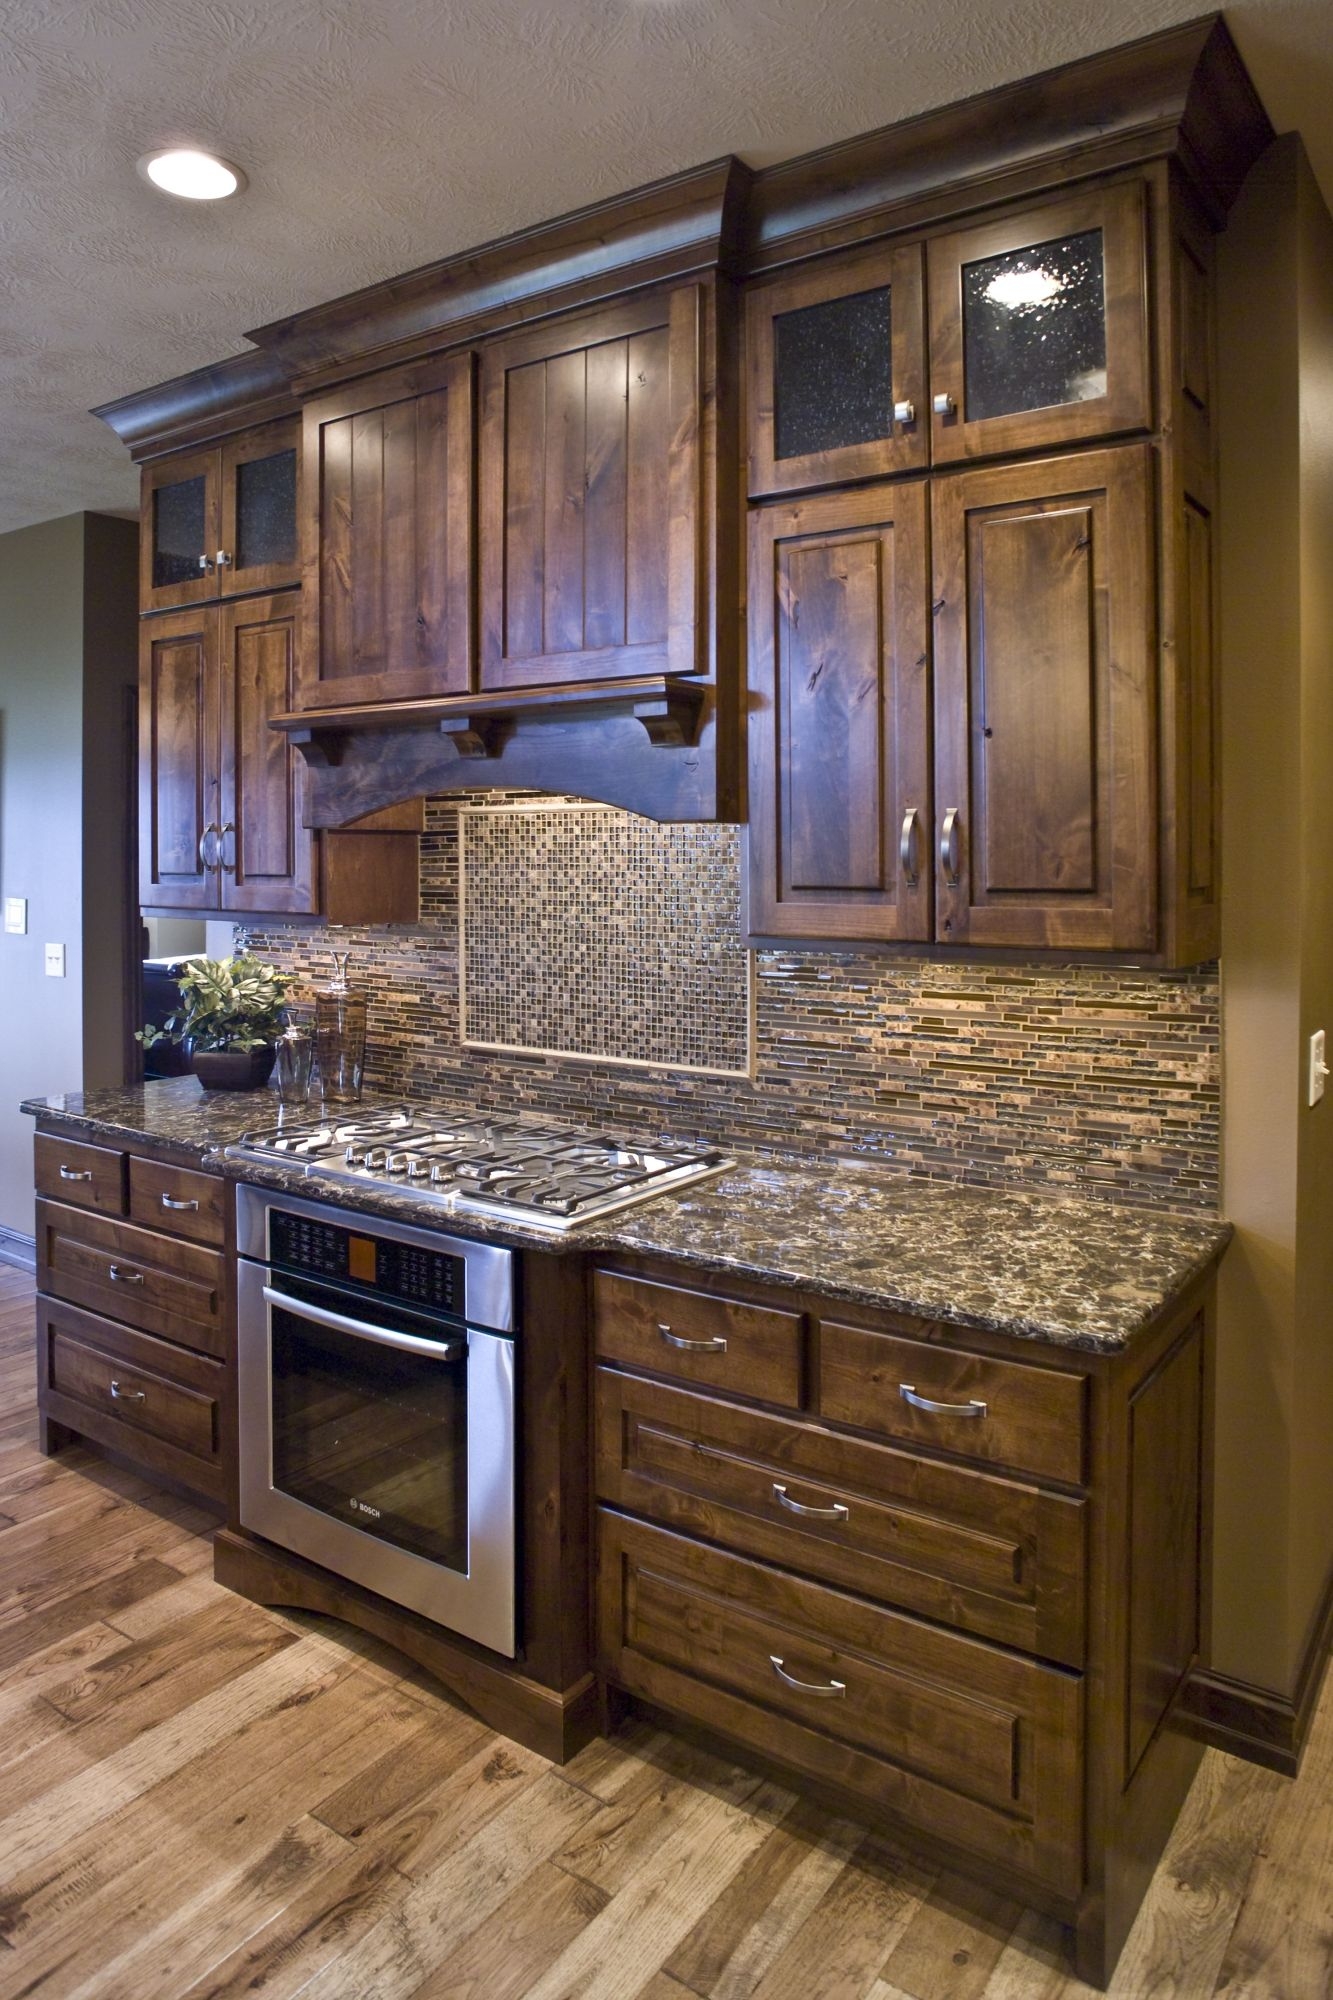 8 Images Knotty Alder Kitchen Cabinets Pictures And View - Alqu Blog